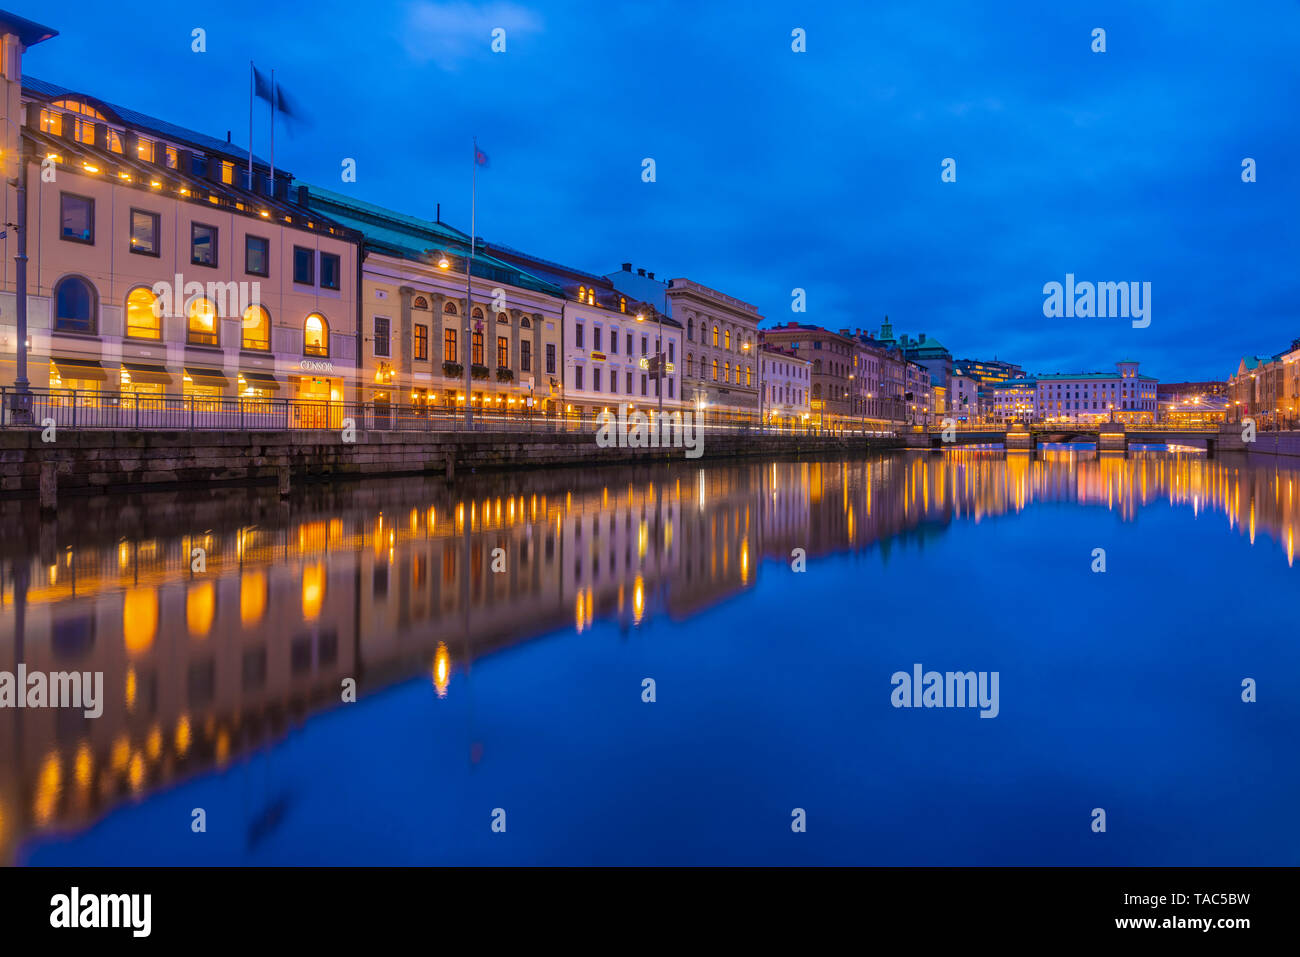 Sweden, Gothenburg, historic city center with view of Soedra hamngatan on the canal Stock Photo